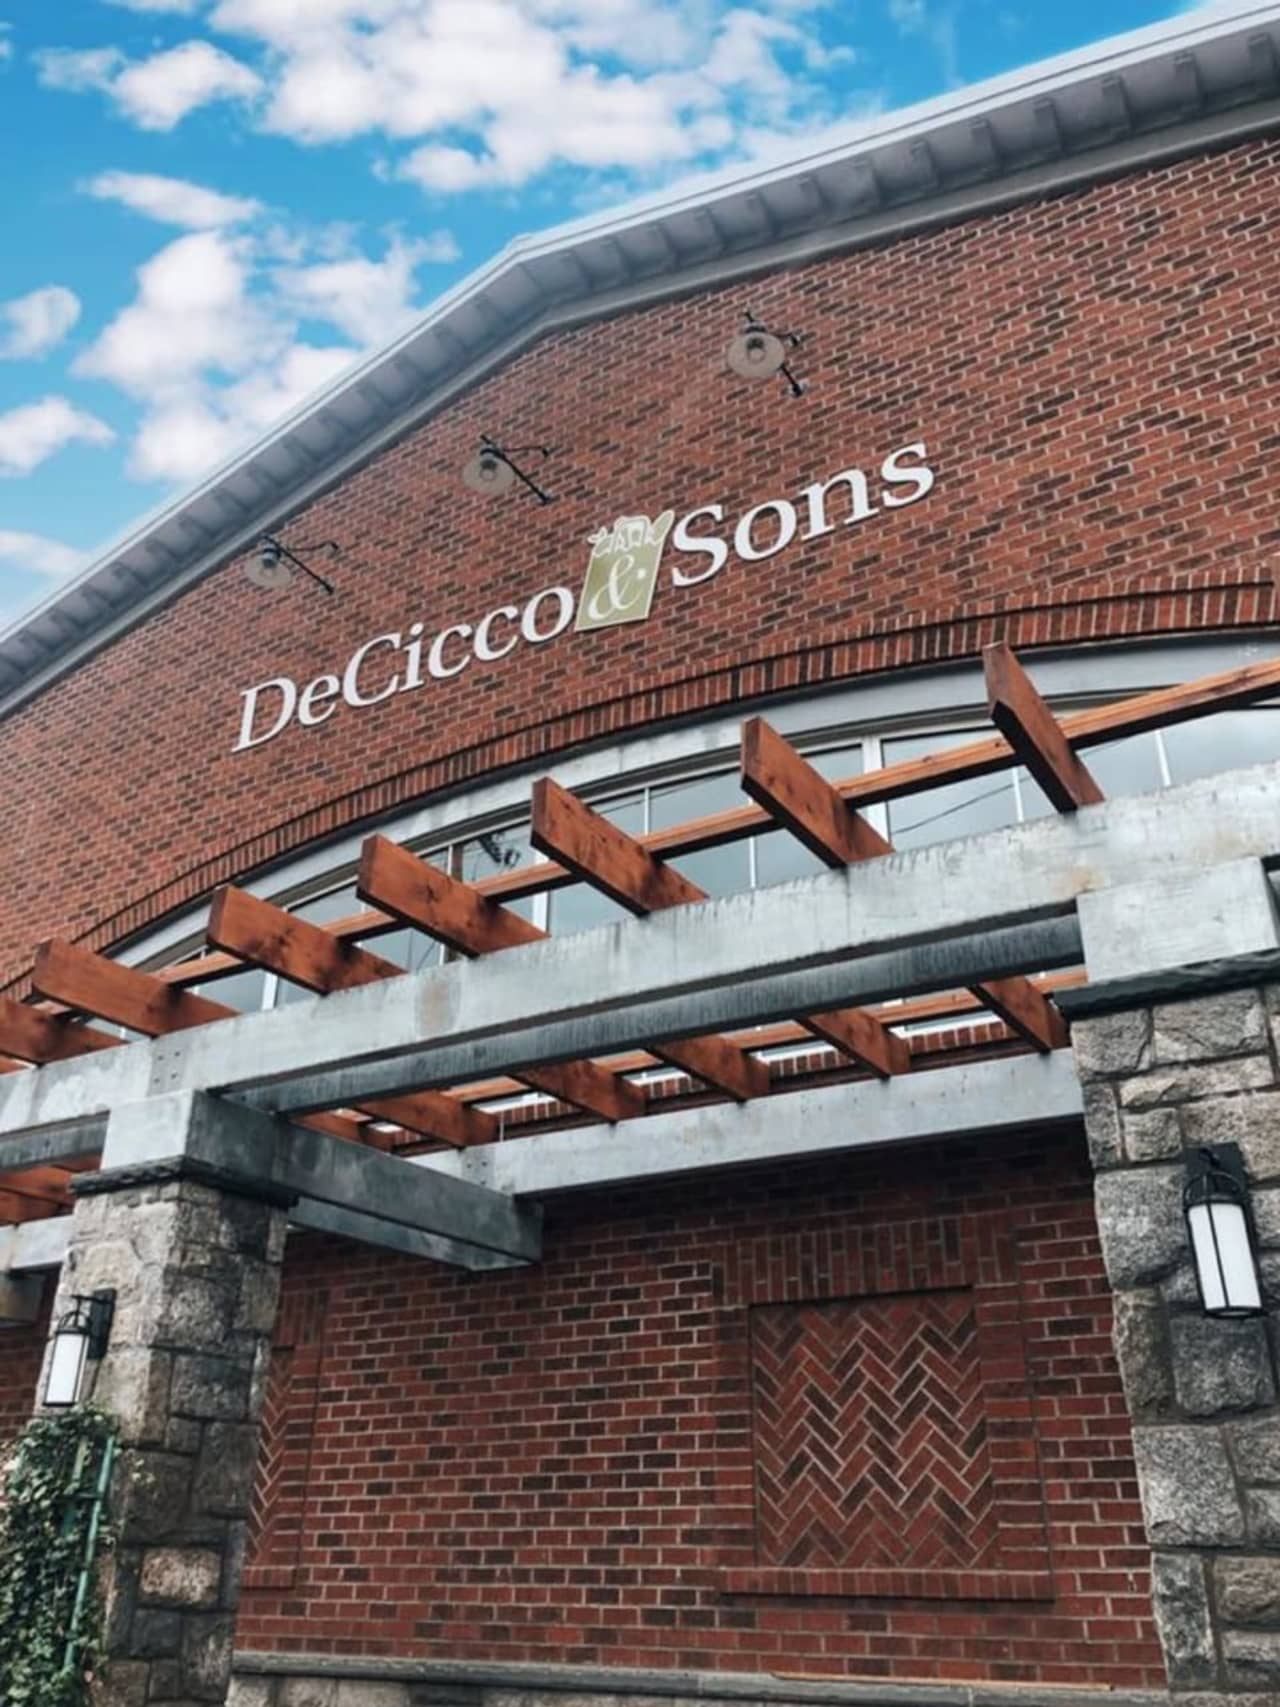 DeCicco & Sons in Somers.